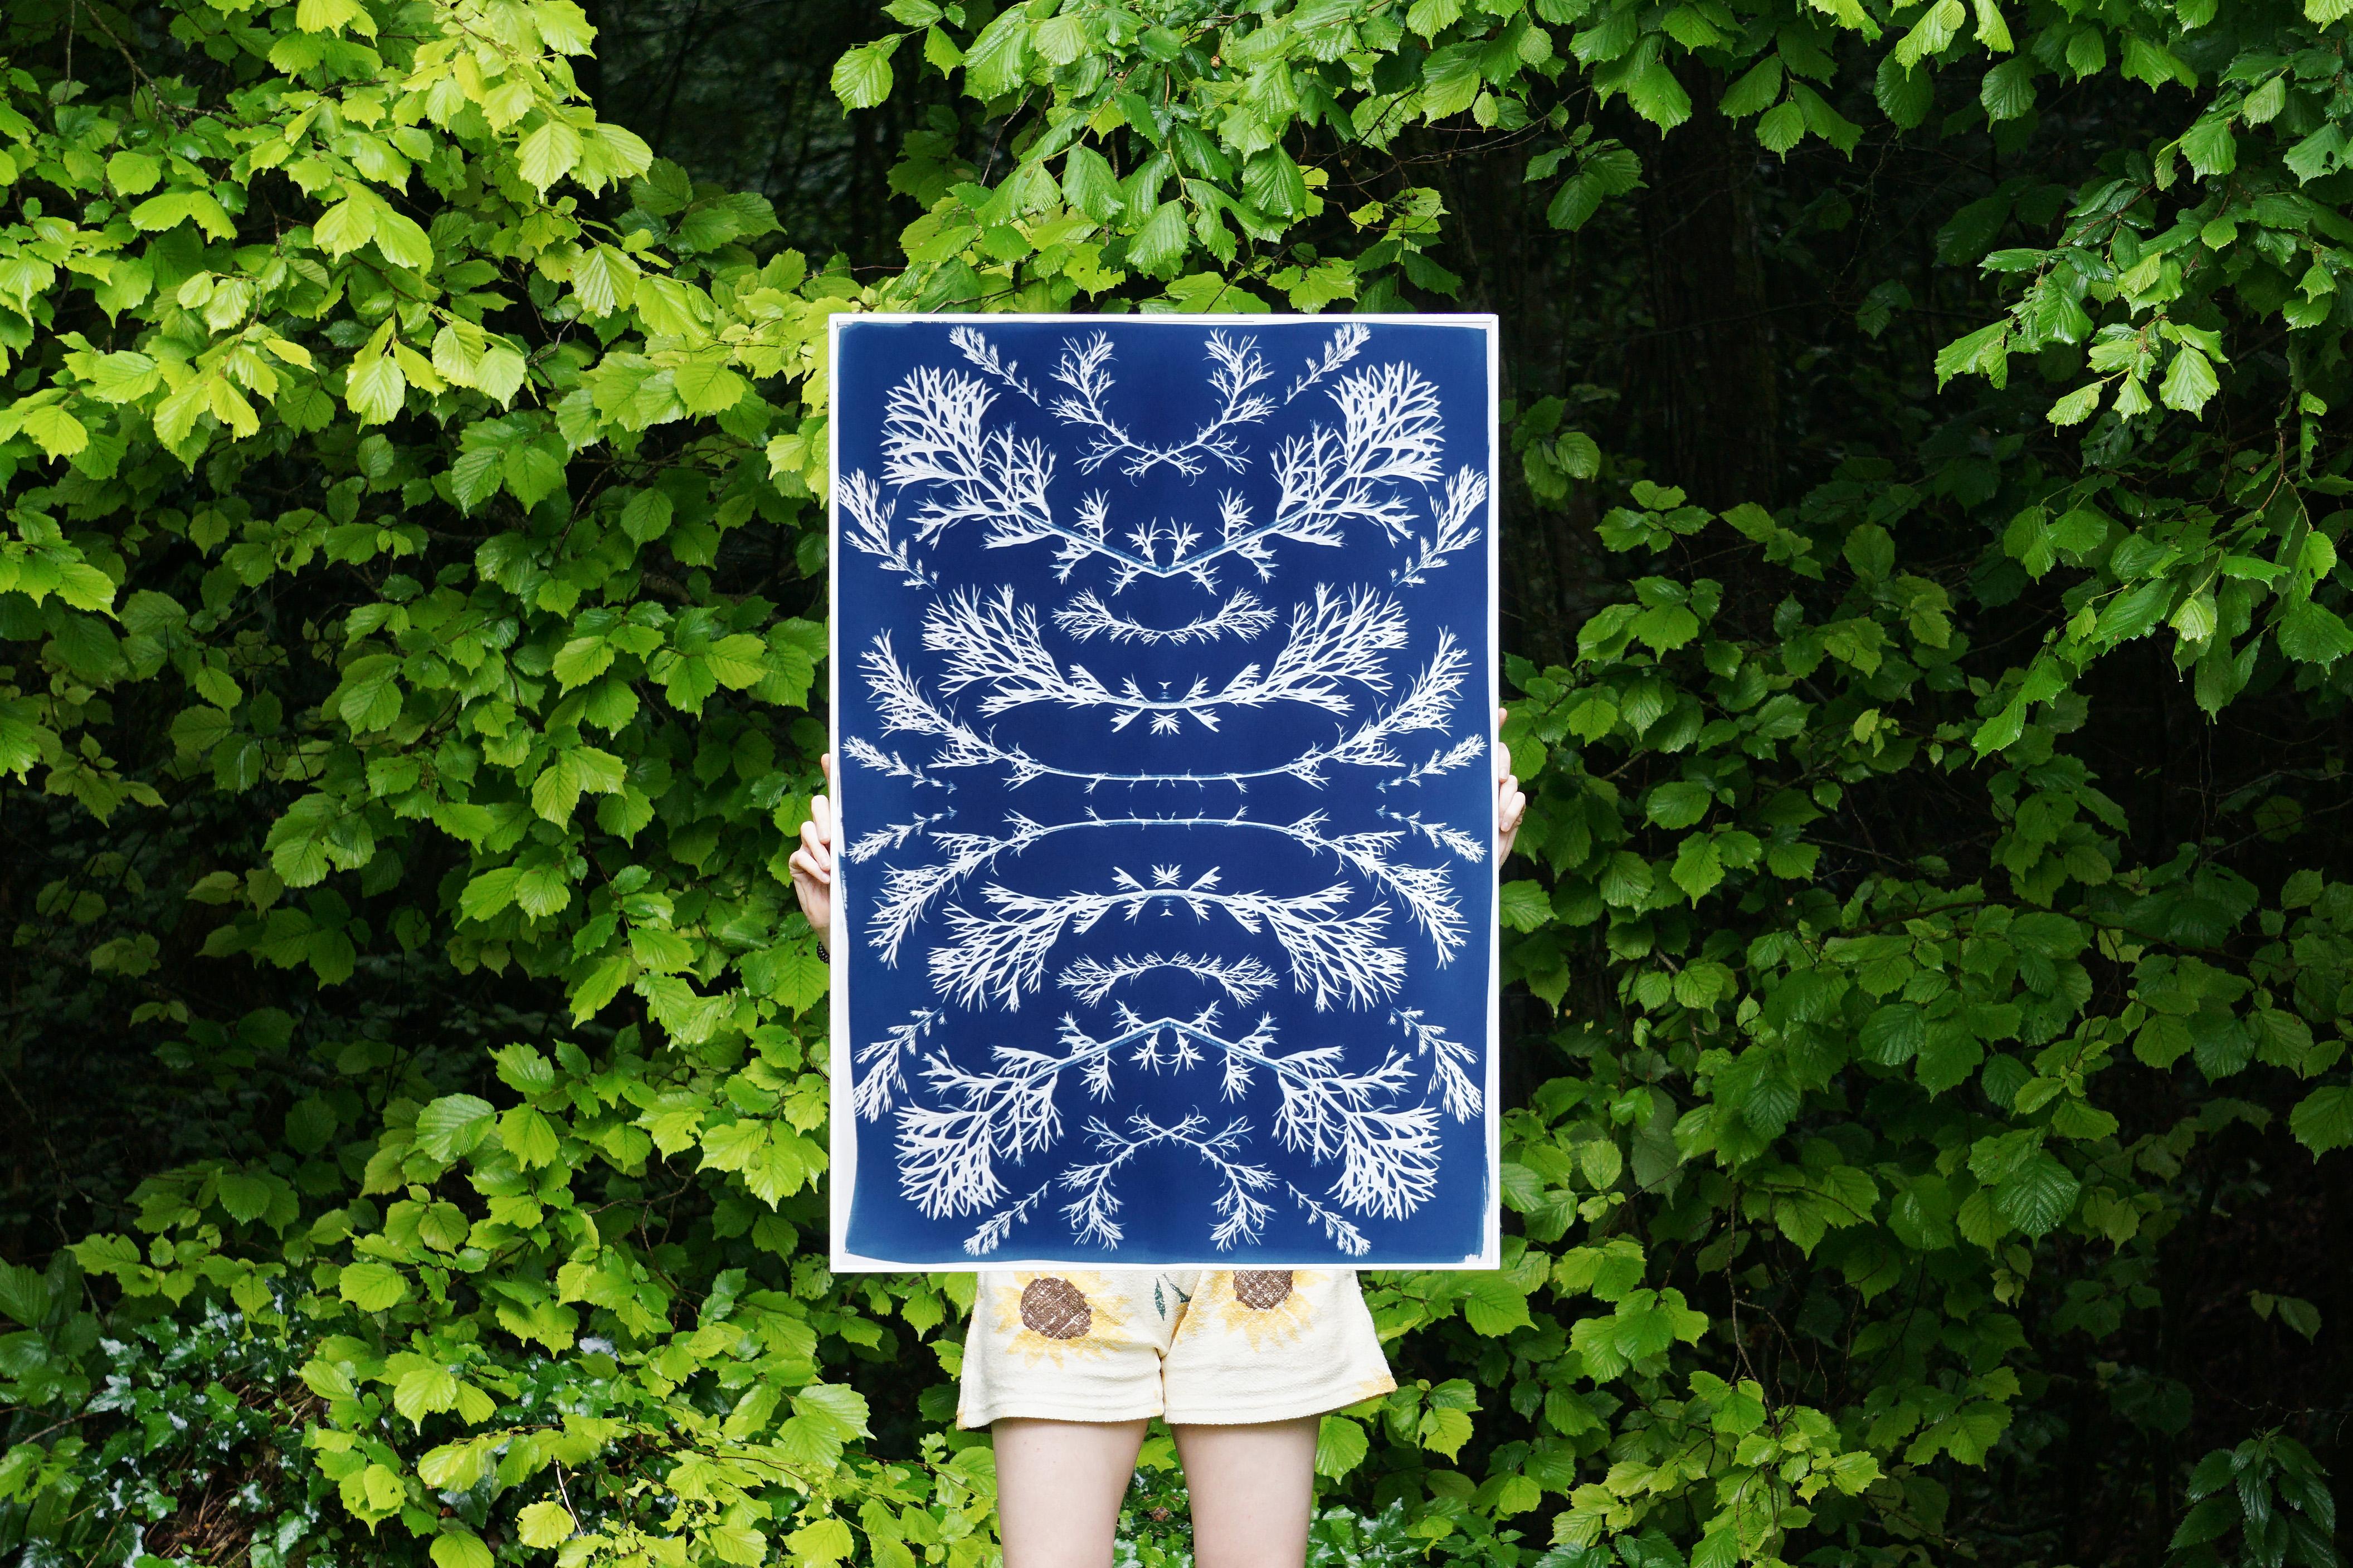 This is an exclusive handprinted limited edition cyanotype.

Details:
+ Title: Vintage Pressed Flowers Nº2
+ Year: 2023
+ Edition Size: 20
+ Stamped and Certificate of Authenticity provided
+ Measurements : 70x100 cm (28x 40 in.), a standard frame